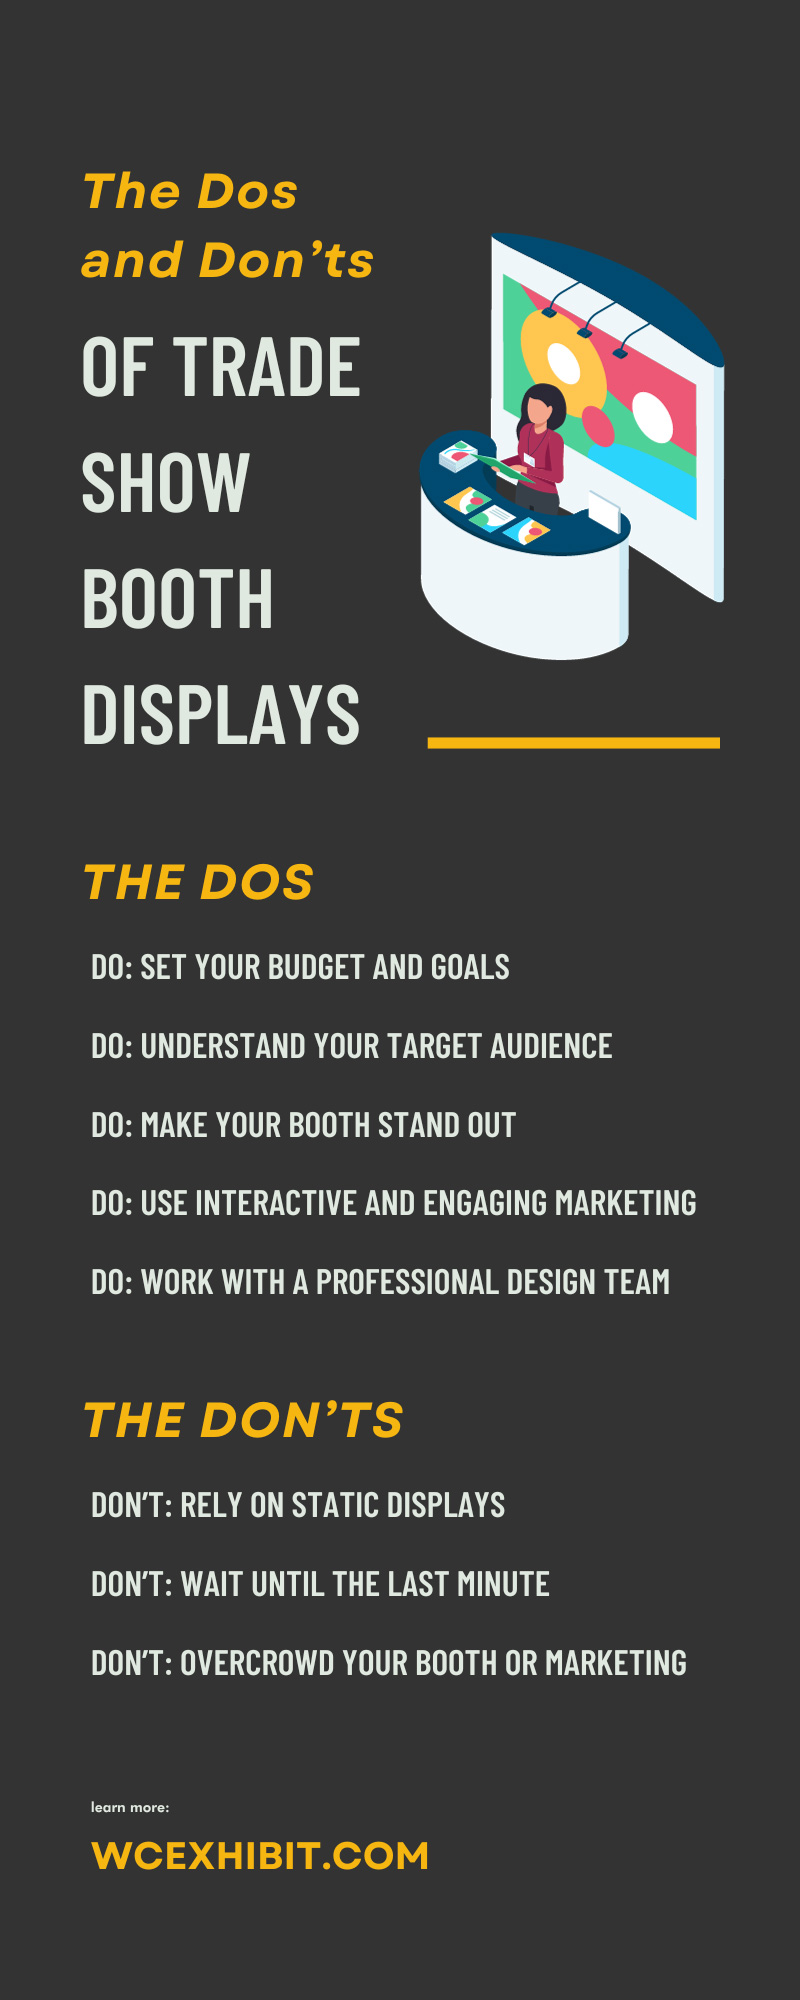 The Dos and Don’ts of Trade Show Booth Displays